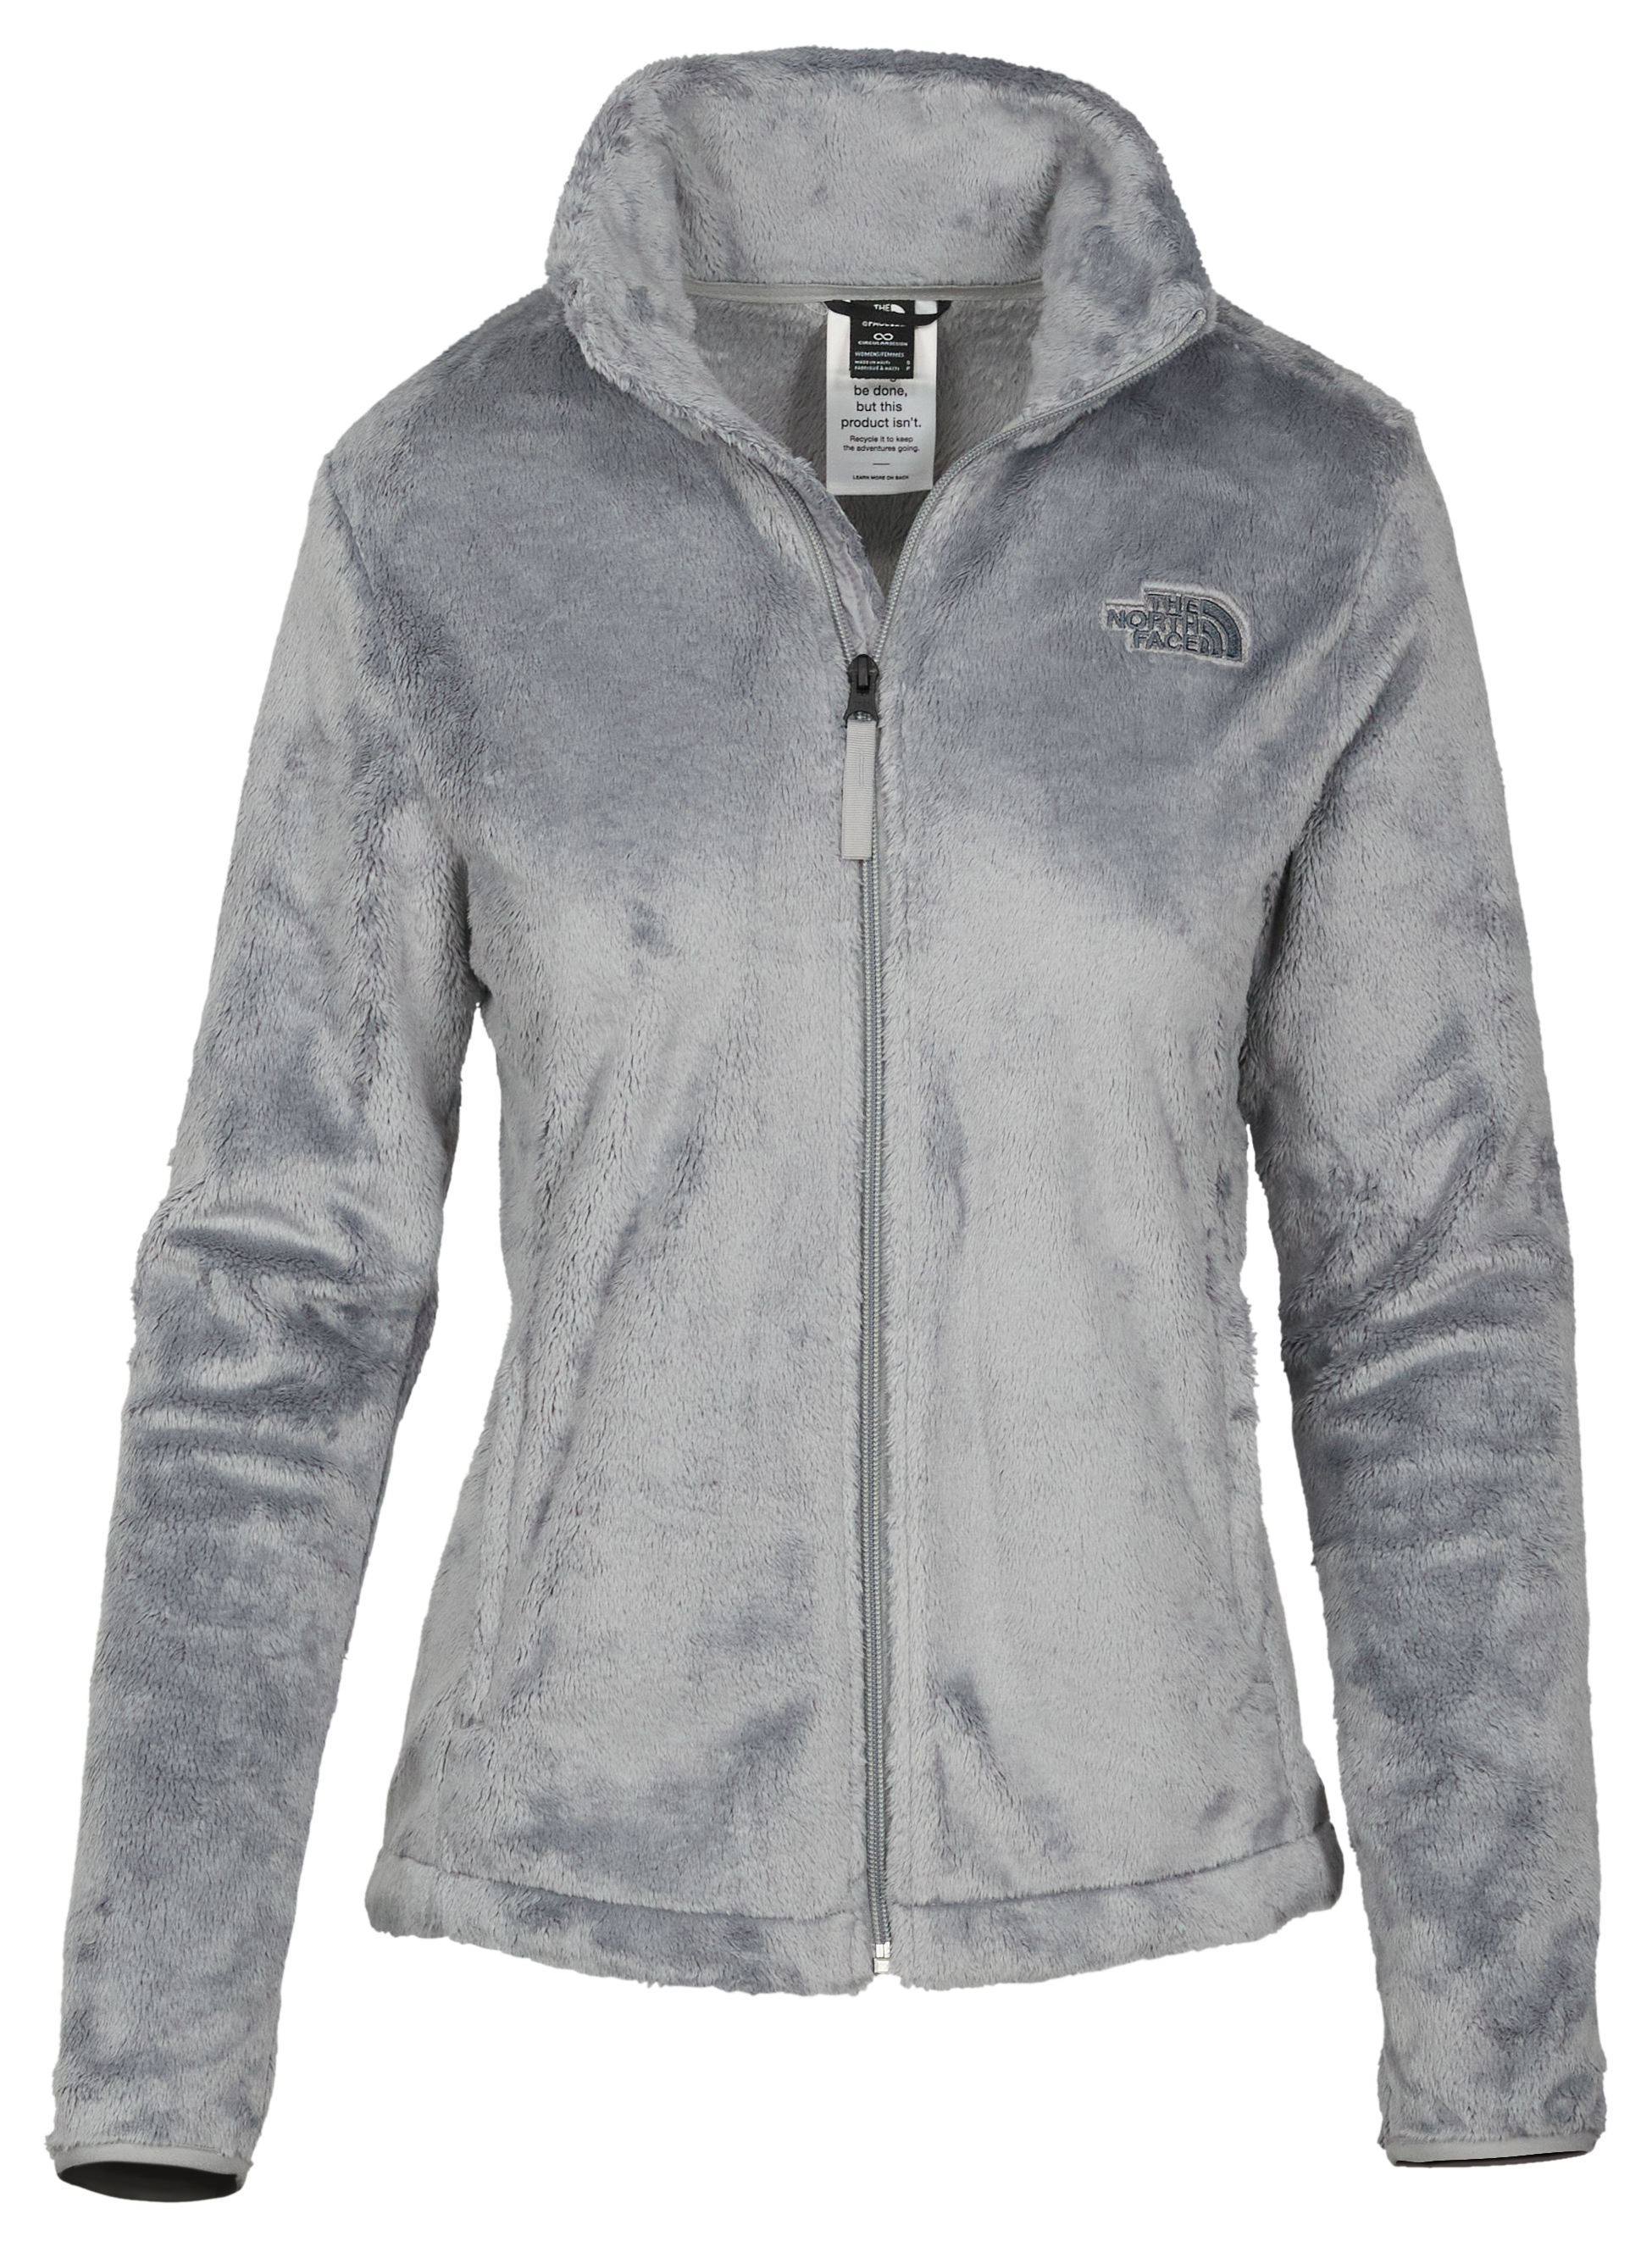 The North Face Osito Jacket for Ladies - Meld Grey - L